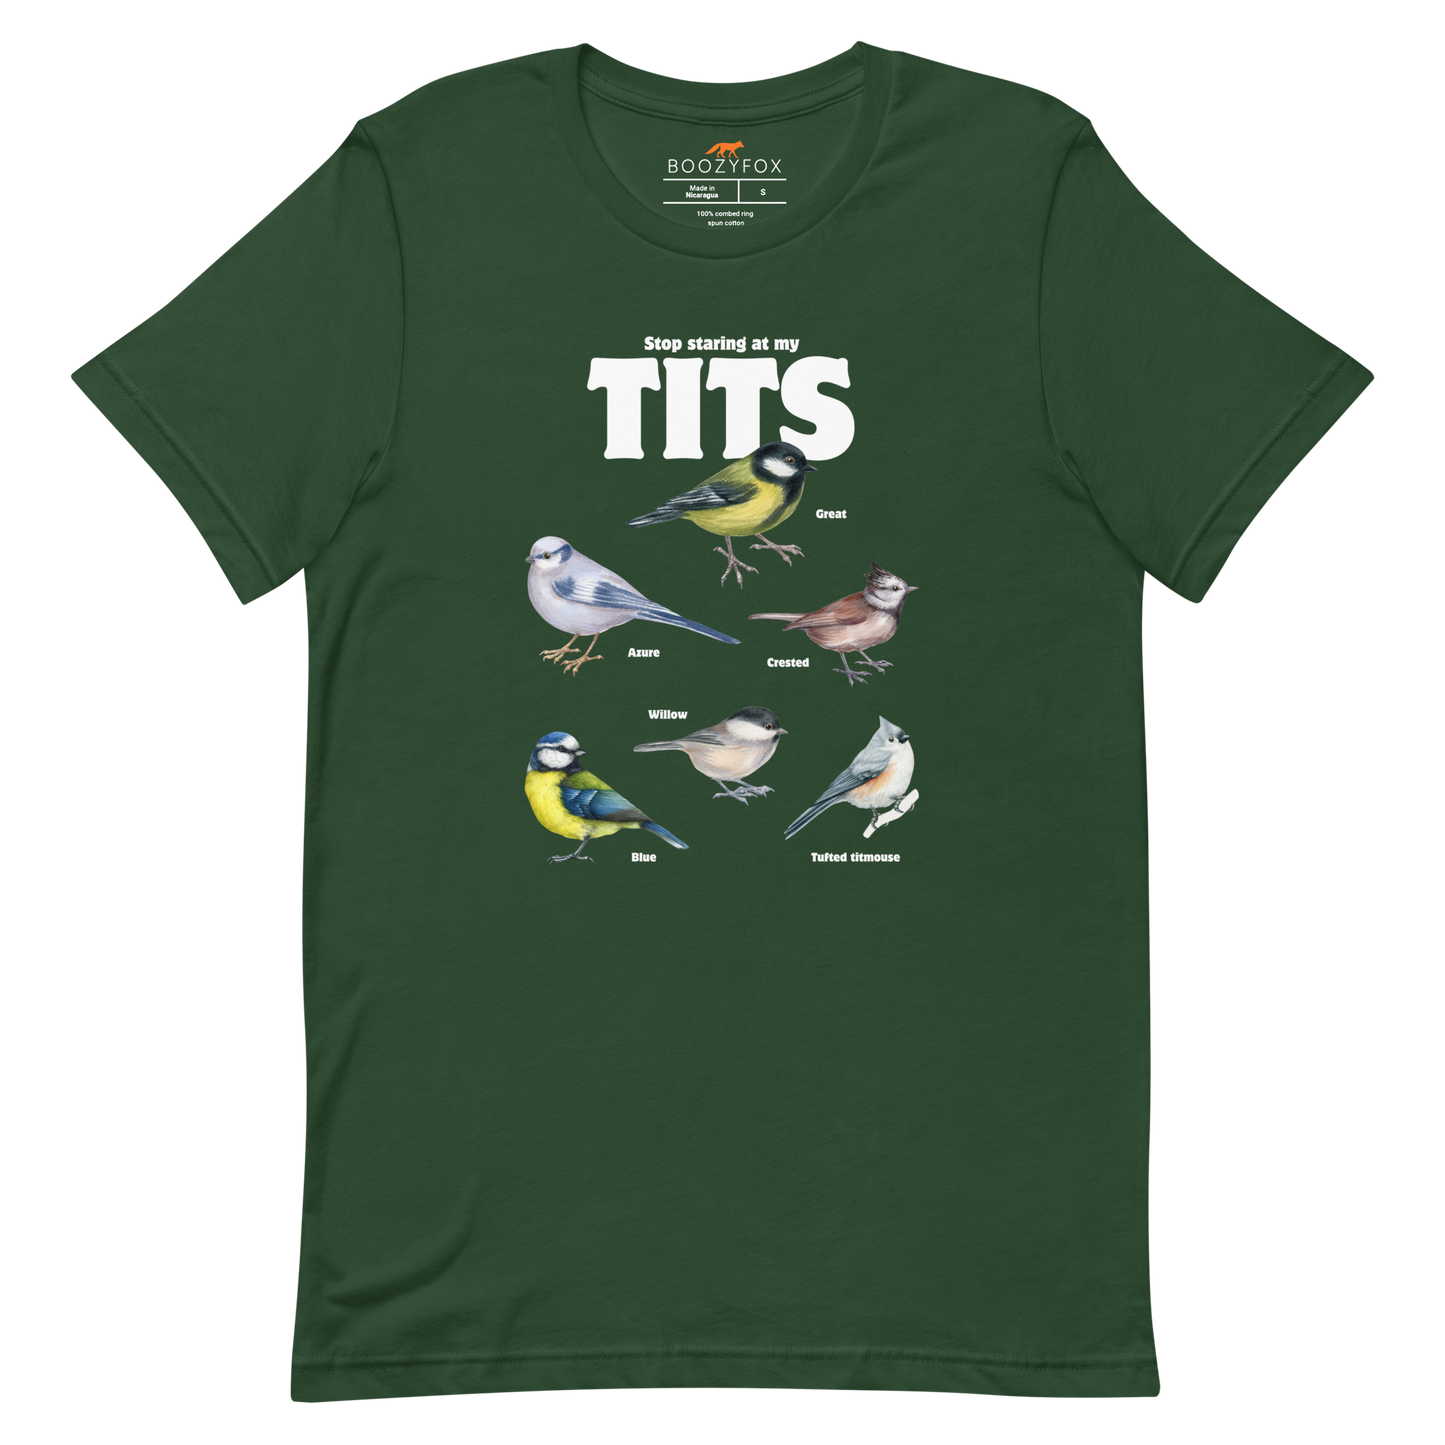 Forest Green Premium Tit Tee featuring a funny Stop Staring At My Tits graphic on the chest - Funny Graphic Tit Bird Tees - Boozy Fox